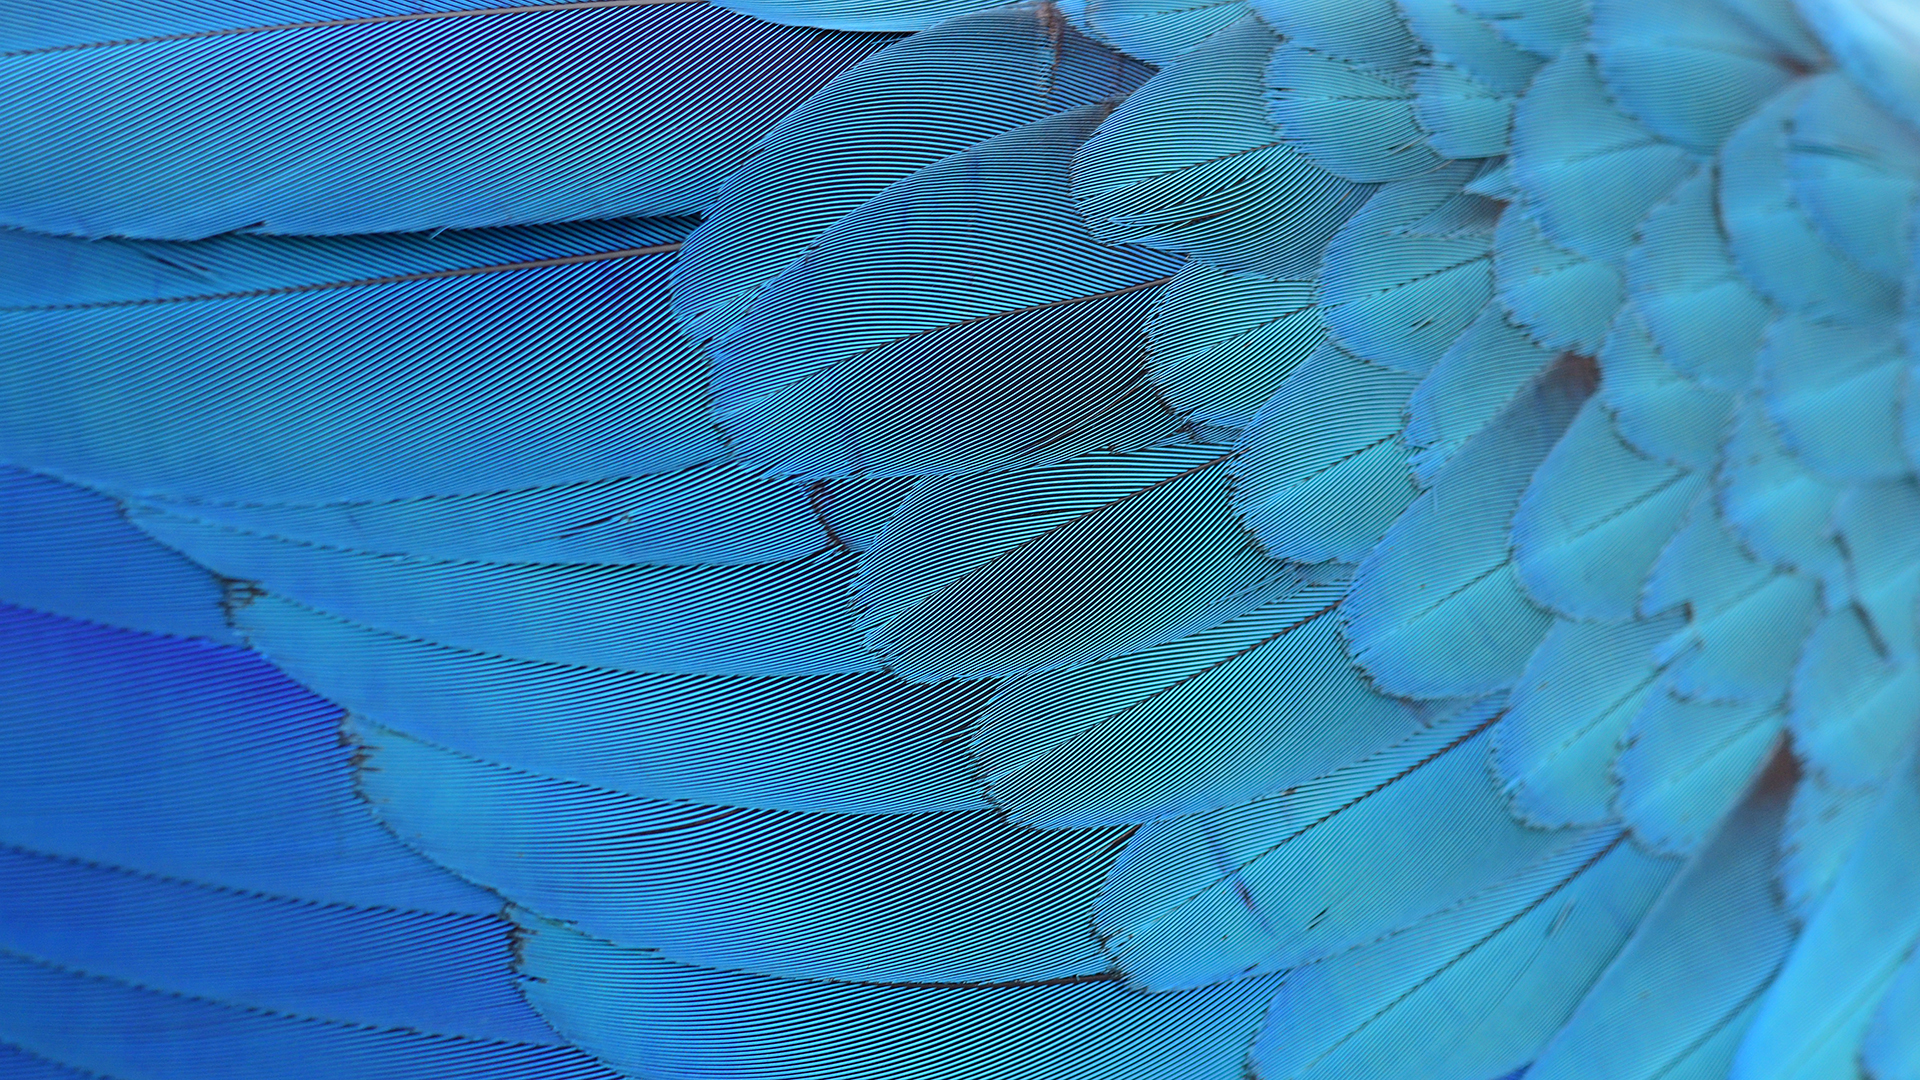 Birds' brilliant blue plumage, such as that of Spix's macaws (Cyanopsitta spixii), gets its color not from pigments but from structures in feathers that scatter light.